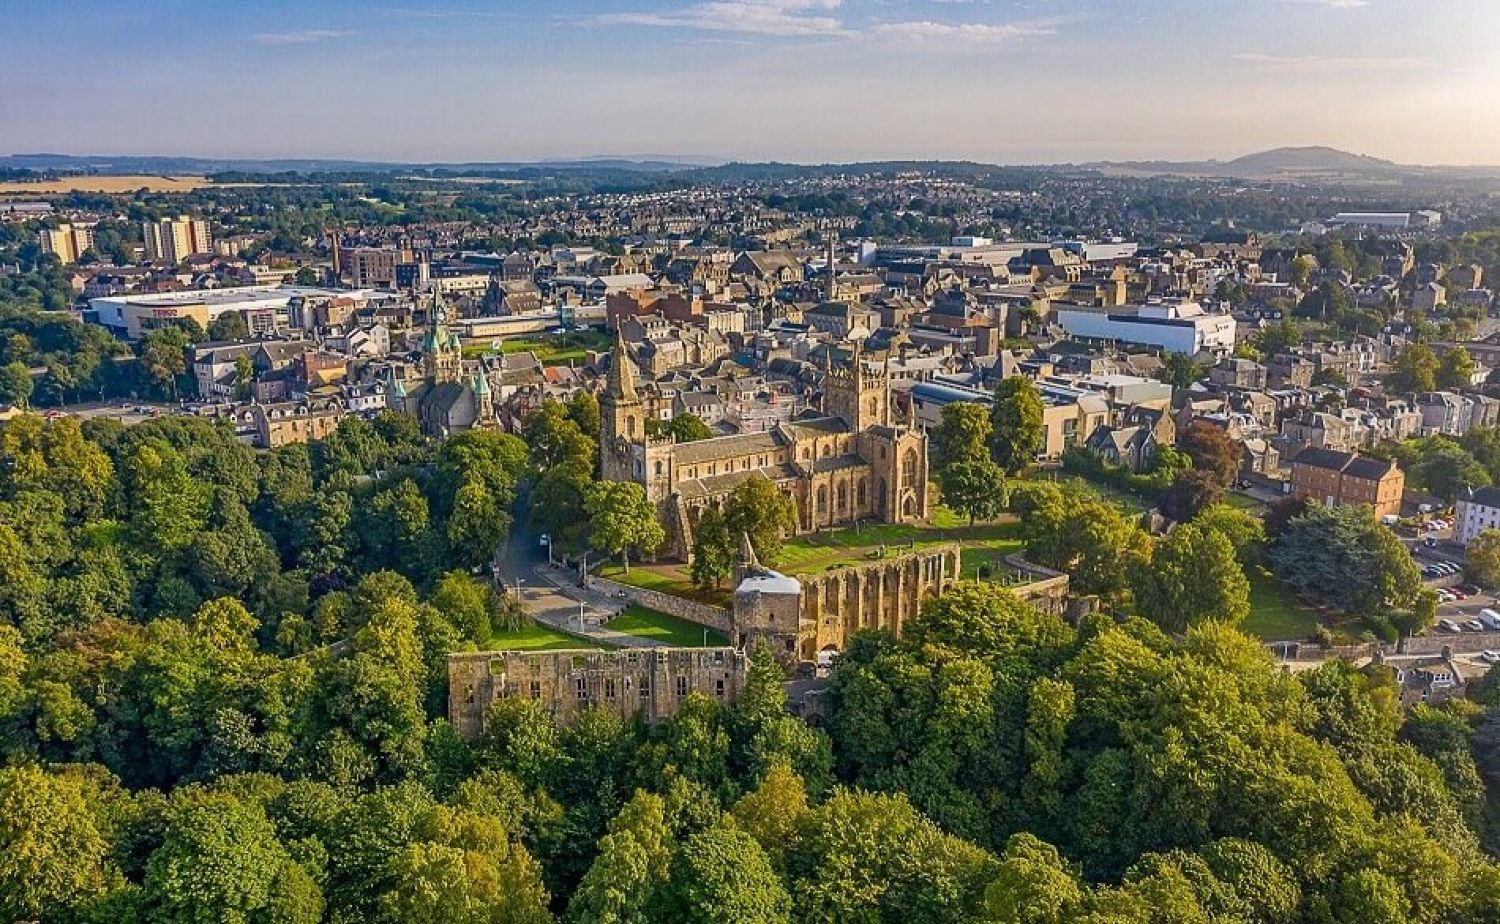 Aerial picture with Dunfermline Abbey surrounded by trees in the foreground.  The background shows Dunfermline's urban landscape to the south. 